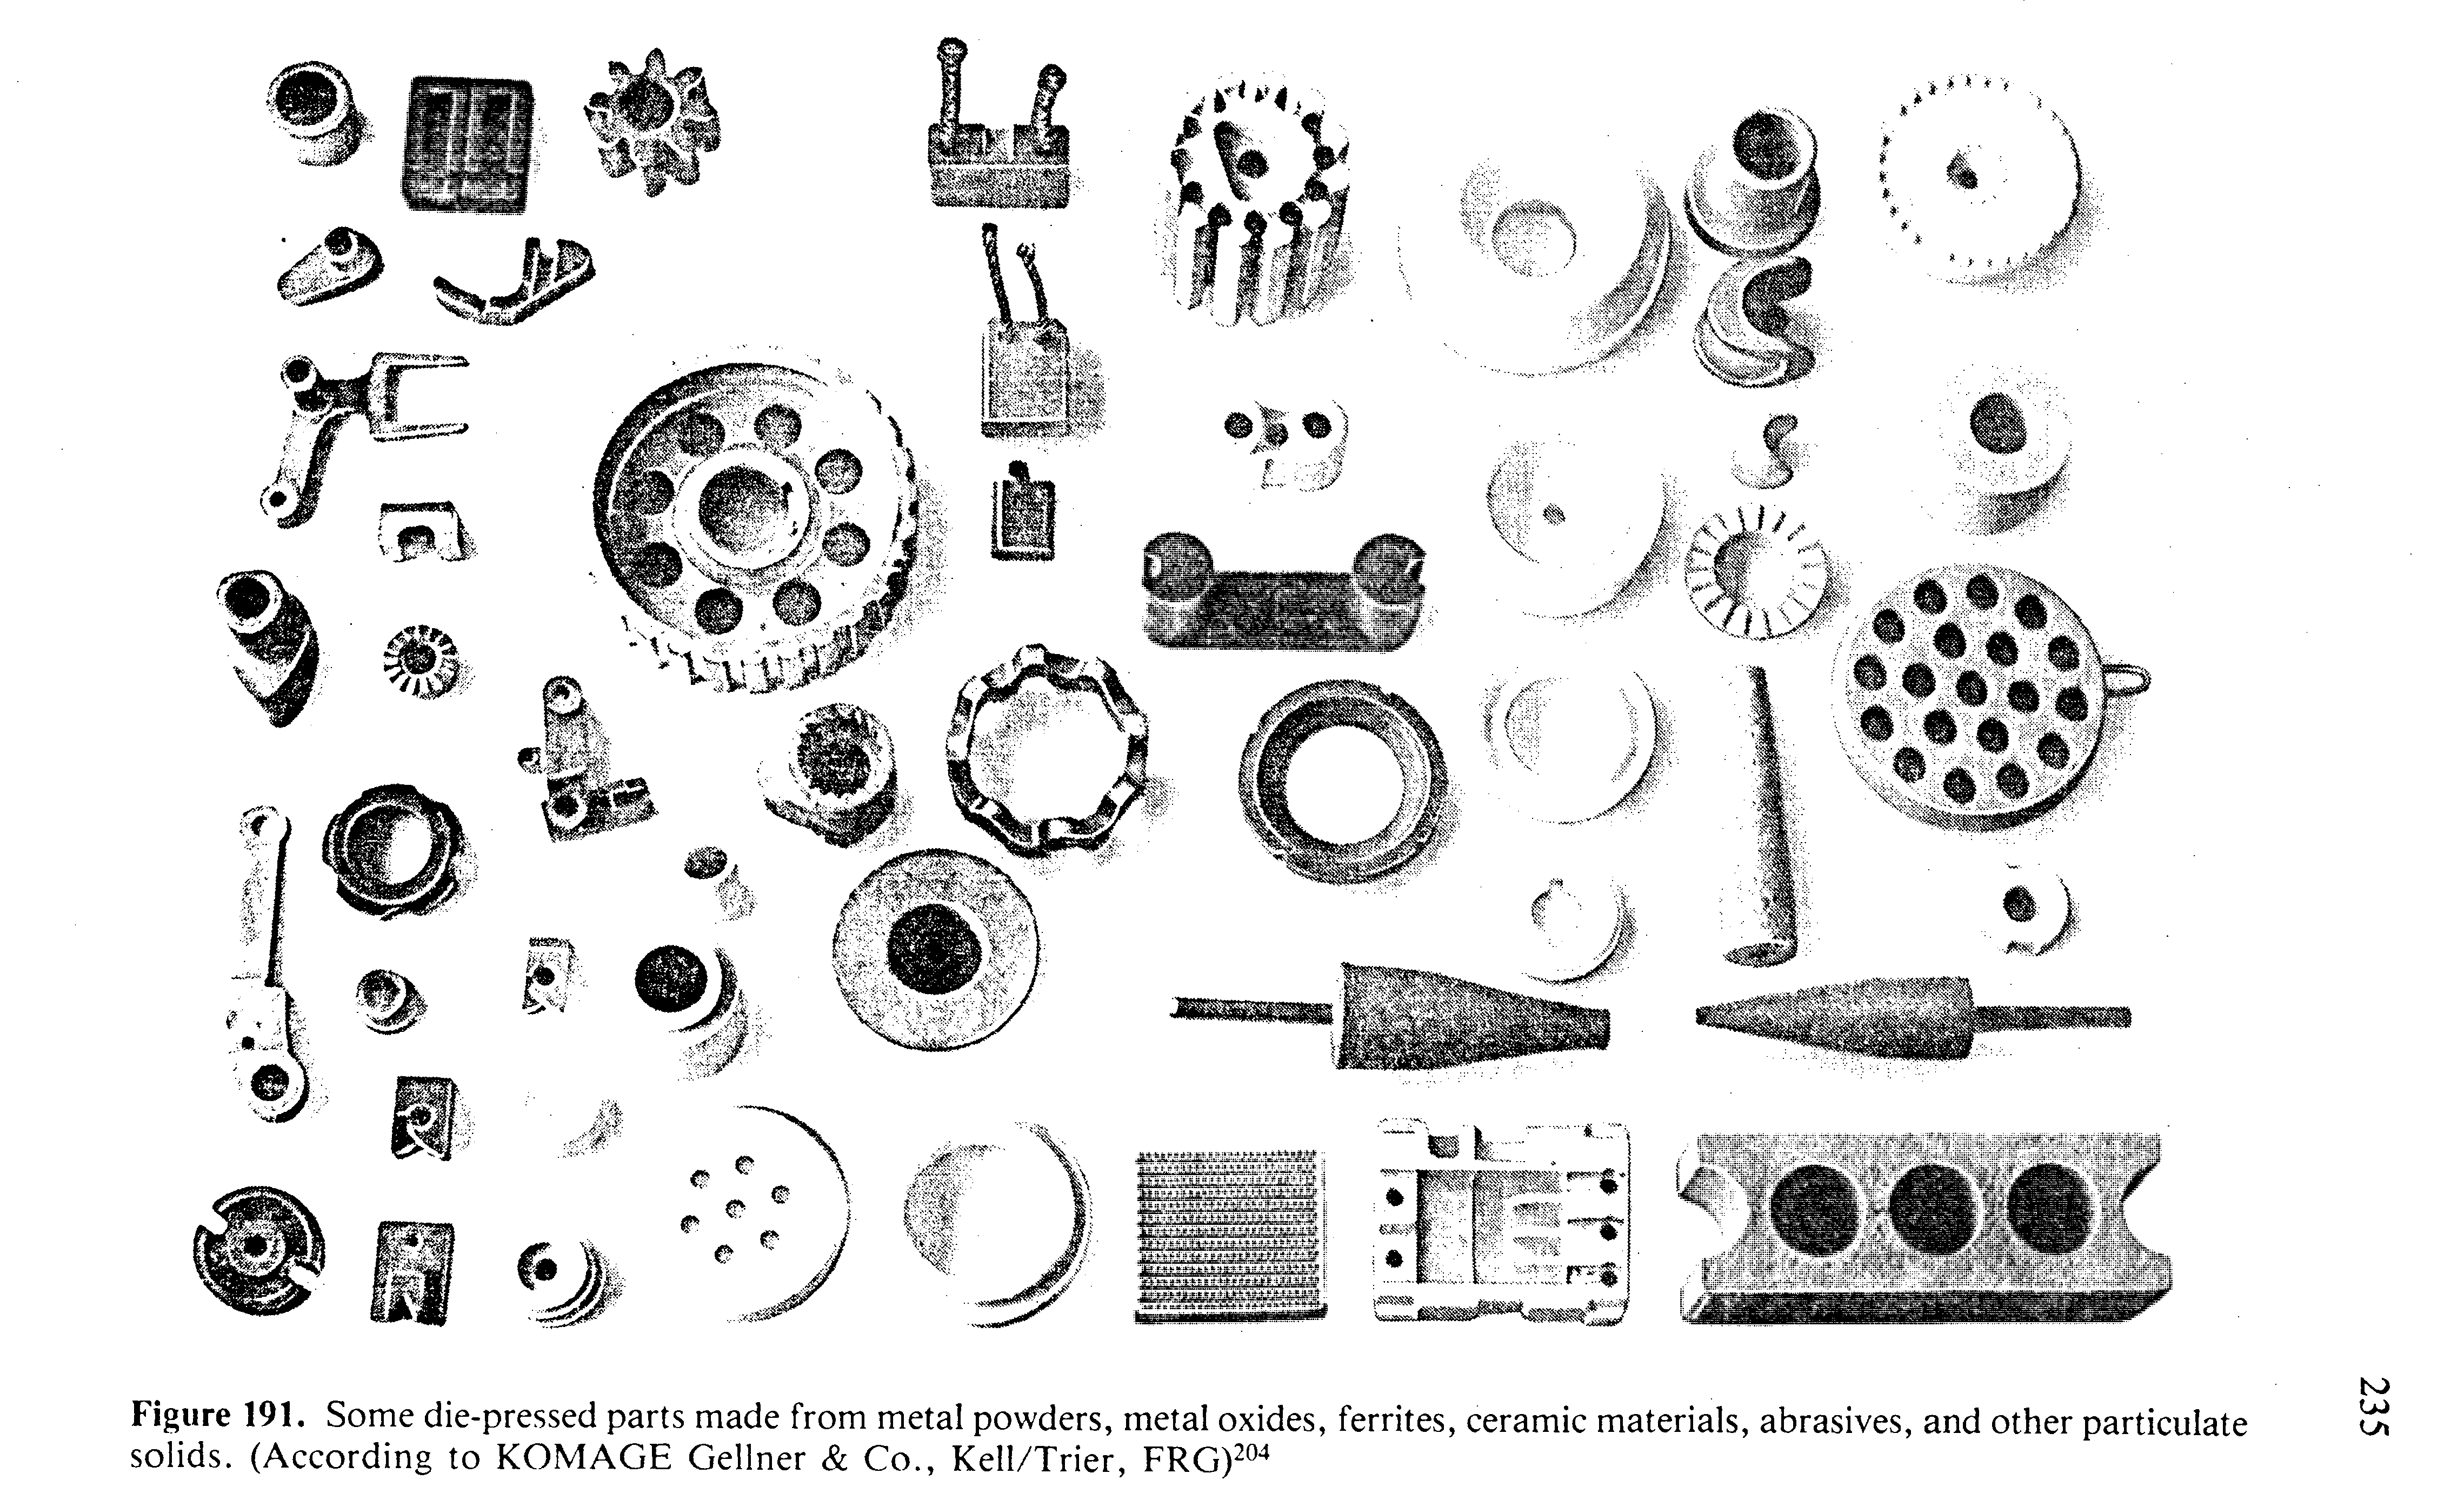 Figure 191. Some die-pressed parts made from metal powders, metal oxides, ferrites, ceramic materials, abrasives, and other particulate solids. (According to KOMAGE Gellner Co., Kell/Trier, FRG) ...